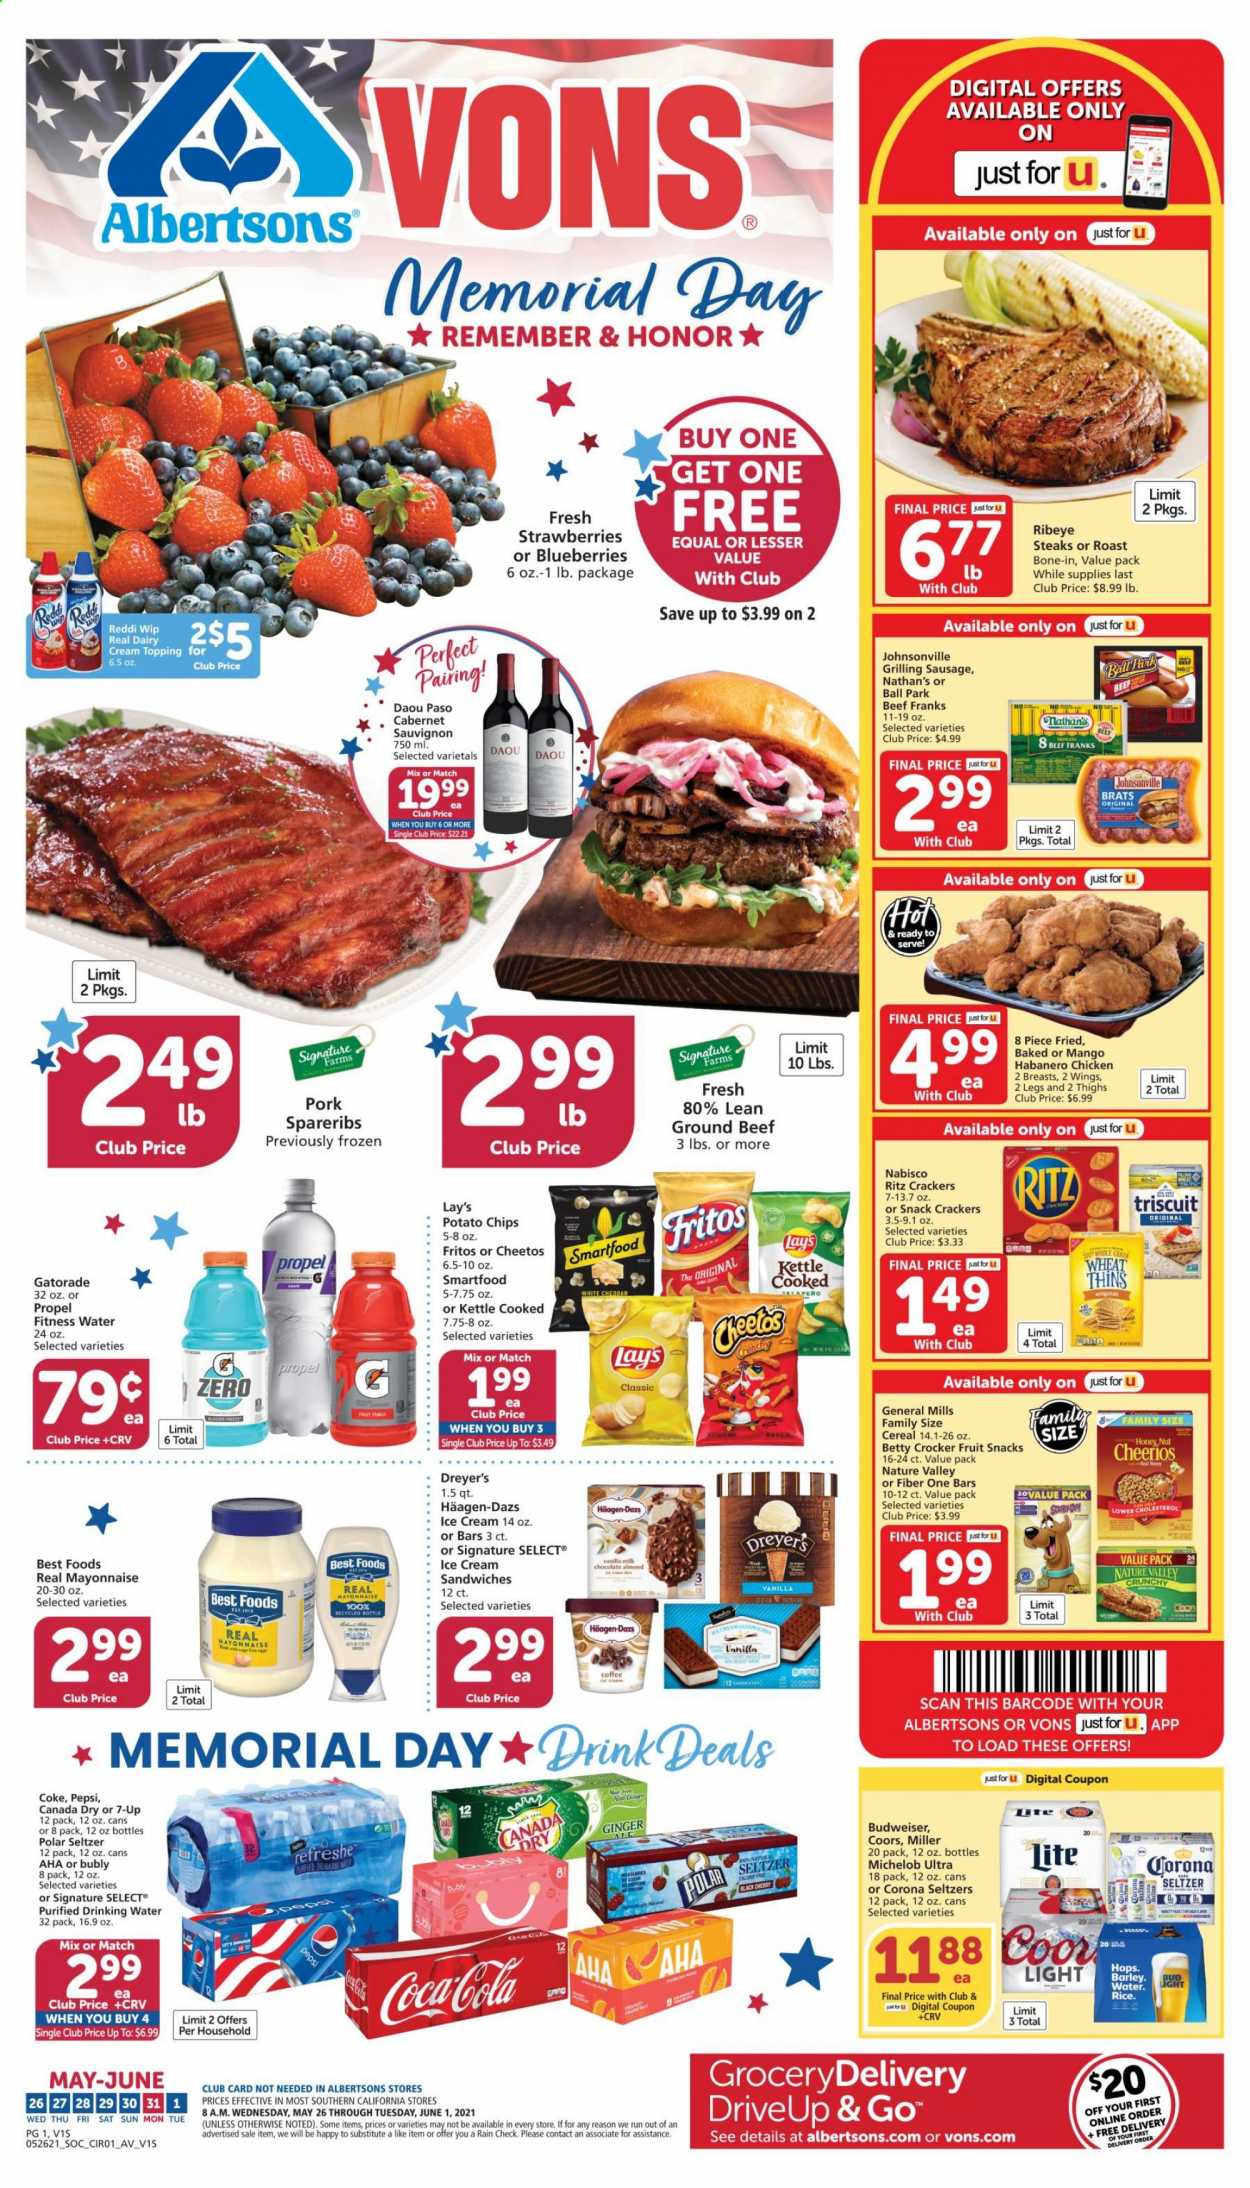 thumbnail - Albertsons Flyer - 05/26/2021 - 06/01/2021 - Sales products - ginger, blueberries, fried chicken, habanero chicken, ready meal, Johnsonville, sausage, frankfurters, snack bar, real dairy cream, mayonnaise, ice cream, ice cream sandwich, Häagen-Dazs, cereal bar, crackers, fruit snack, RITZ, Nabisco, General Mills, Fritos, potato chips, Cheetos, Lay’s, Smartfood, Thins, salty snack, topping, cereals, Cheerios, Nature Valley, Fiber One, Canada Dry, Coca-Cola, ginger ale, Pepsi, soft drink, 7UP, Gatorade, Coke, electrolyte drink, flavored water, purified water, carbonated soft drink, Cabernet Sauvignon, red wine, wine, beer, Budweiser, Corona Extra, beef meat, beef steak, ground beef, ribeye steak, ribs, pork meat, pork ribs, pork spare ribs, Coors, Michelob. Page 1.